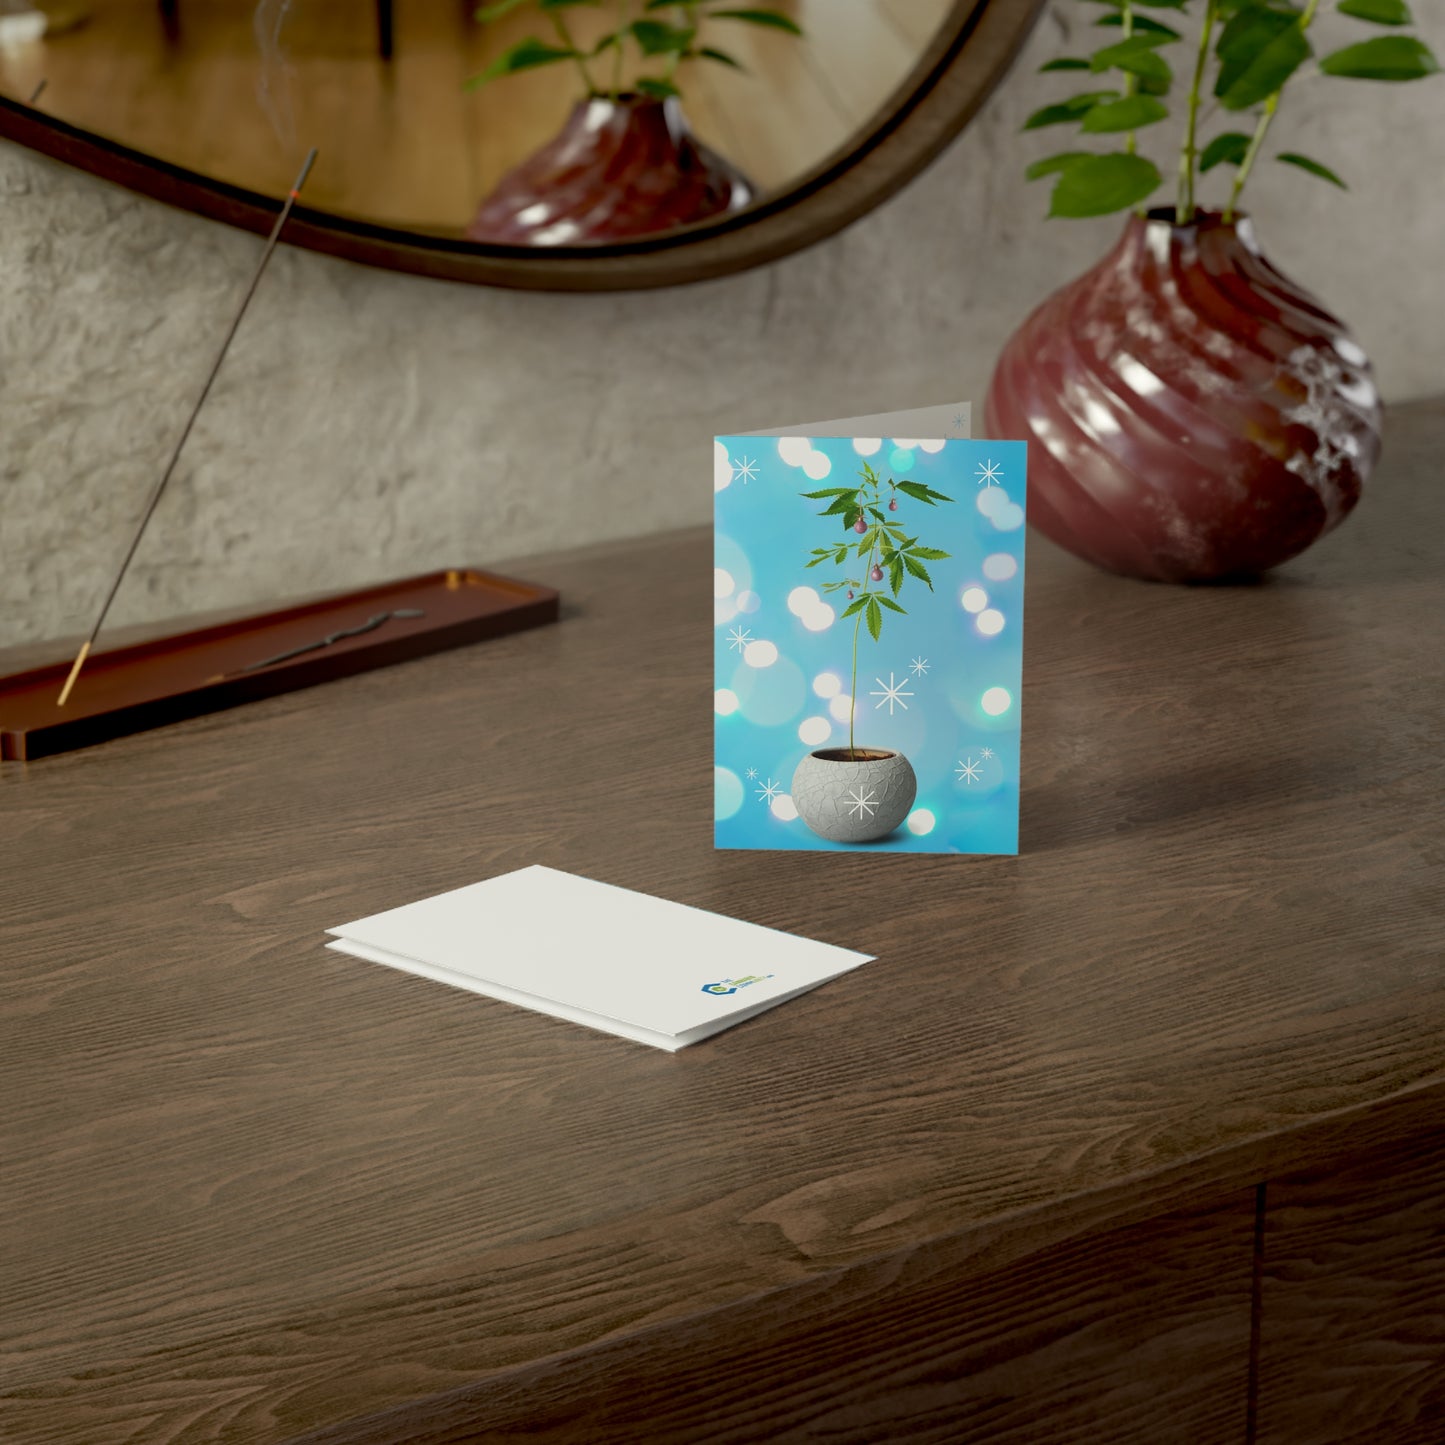 A personalized Potted Christmas Marijuana Plant Merry Christmas Greeting Card with a floral design standing on a wooden table, accompanied by an envelope, near a decorative vase with a plant.